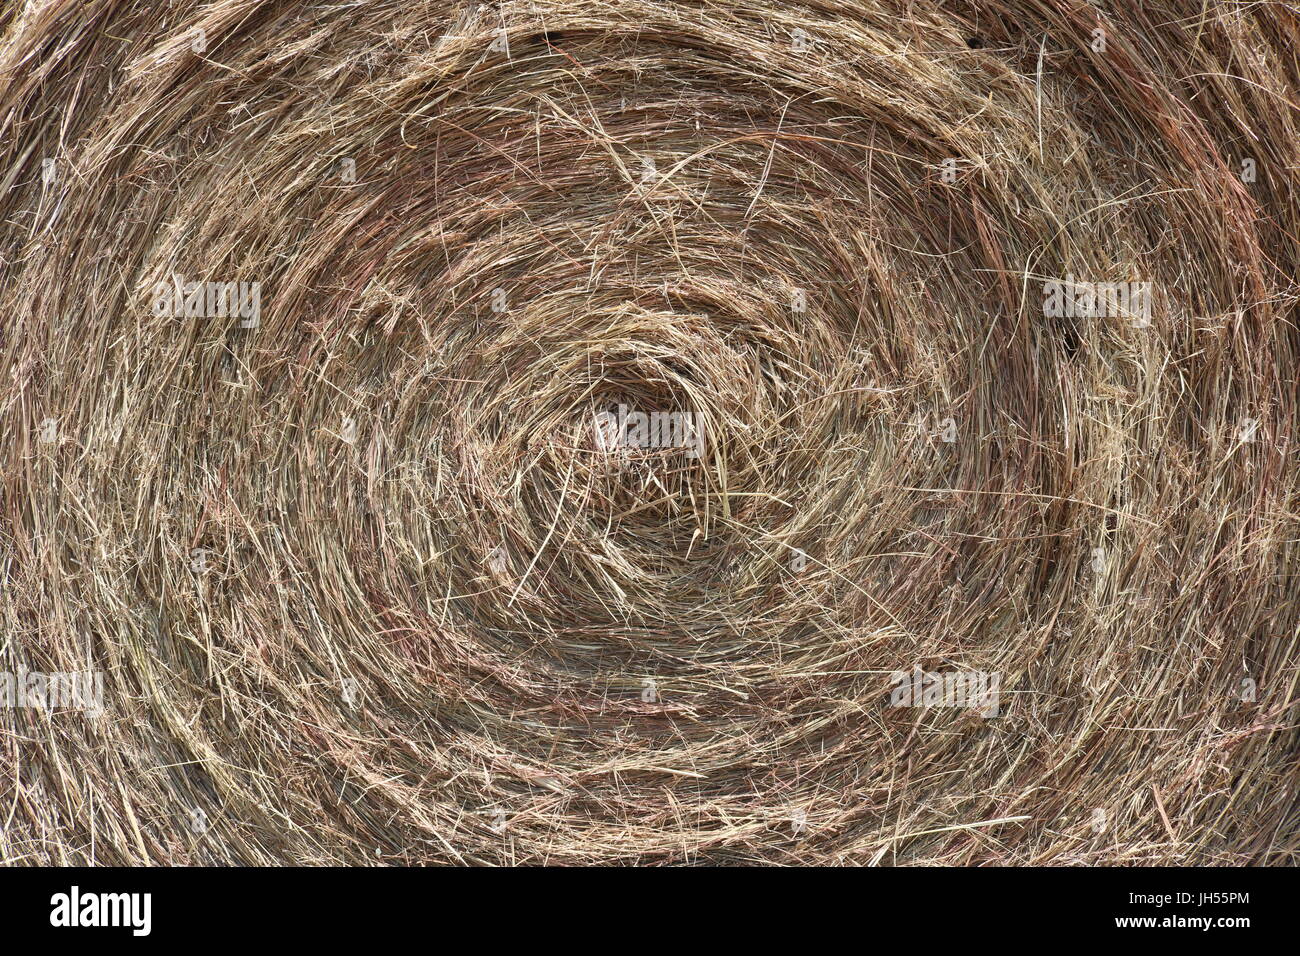 Close up of a round hay bale in Texas Banque D'Images